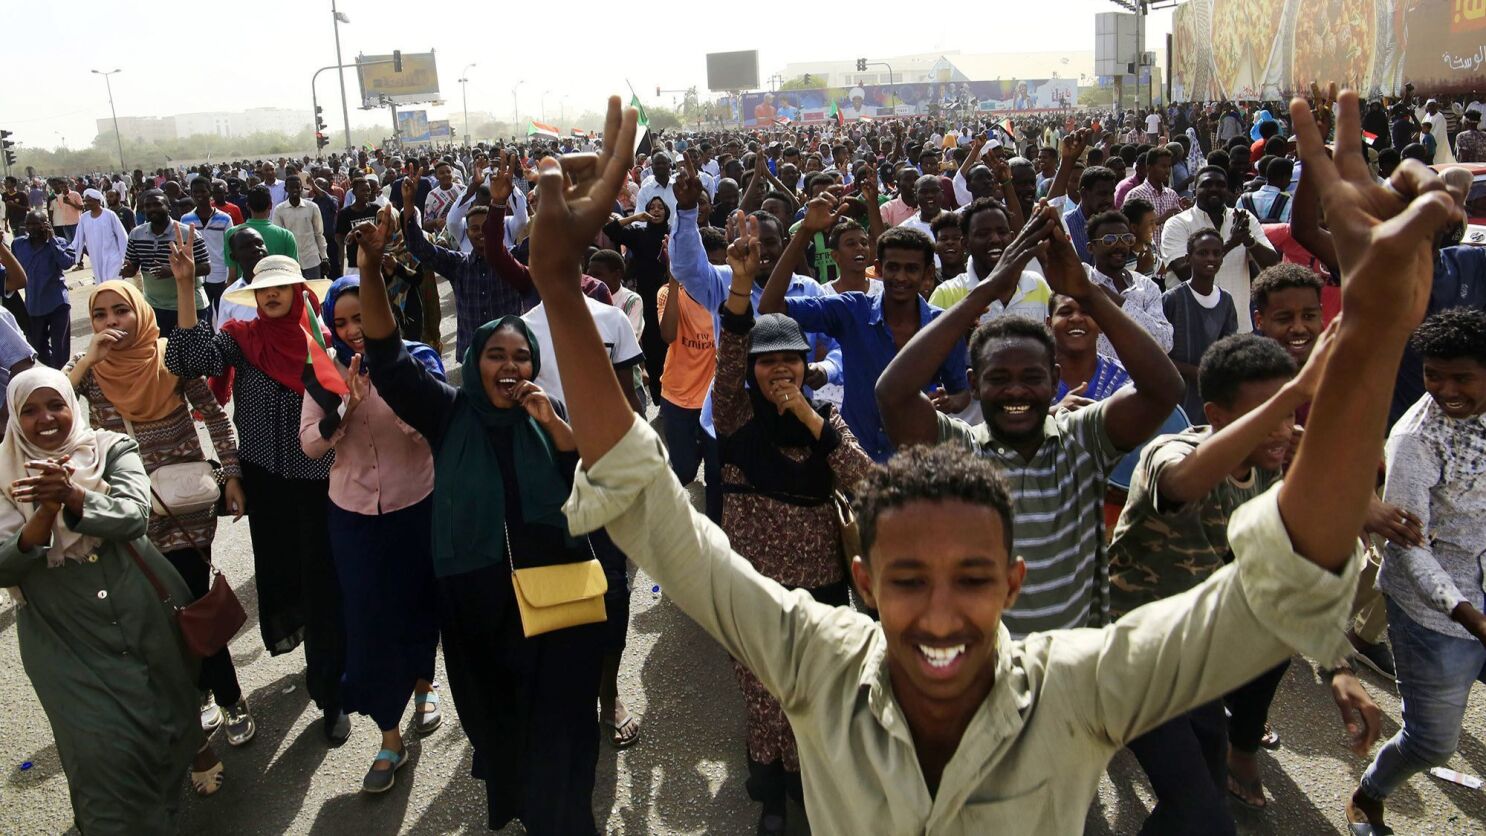 Sudan coup: Military ousts President Bashir after months of protests - Los Angeles Times